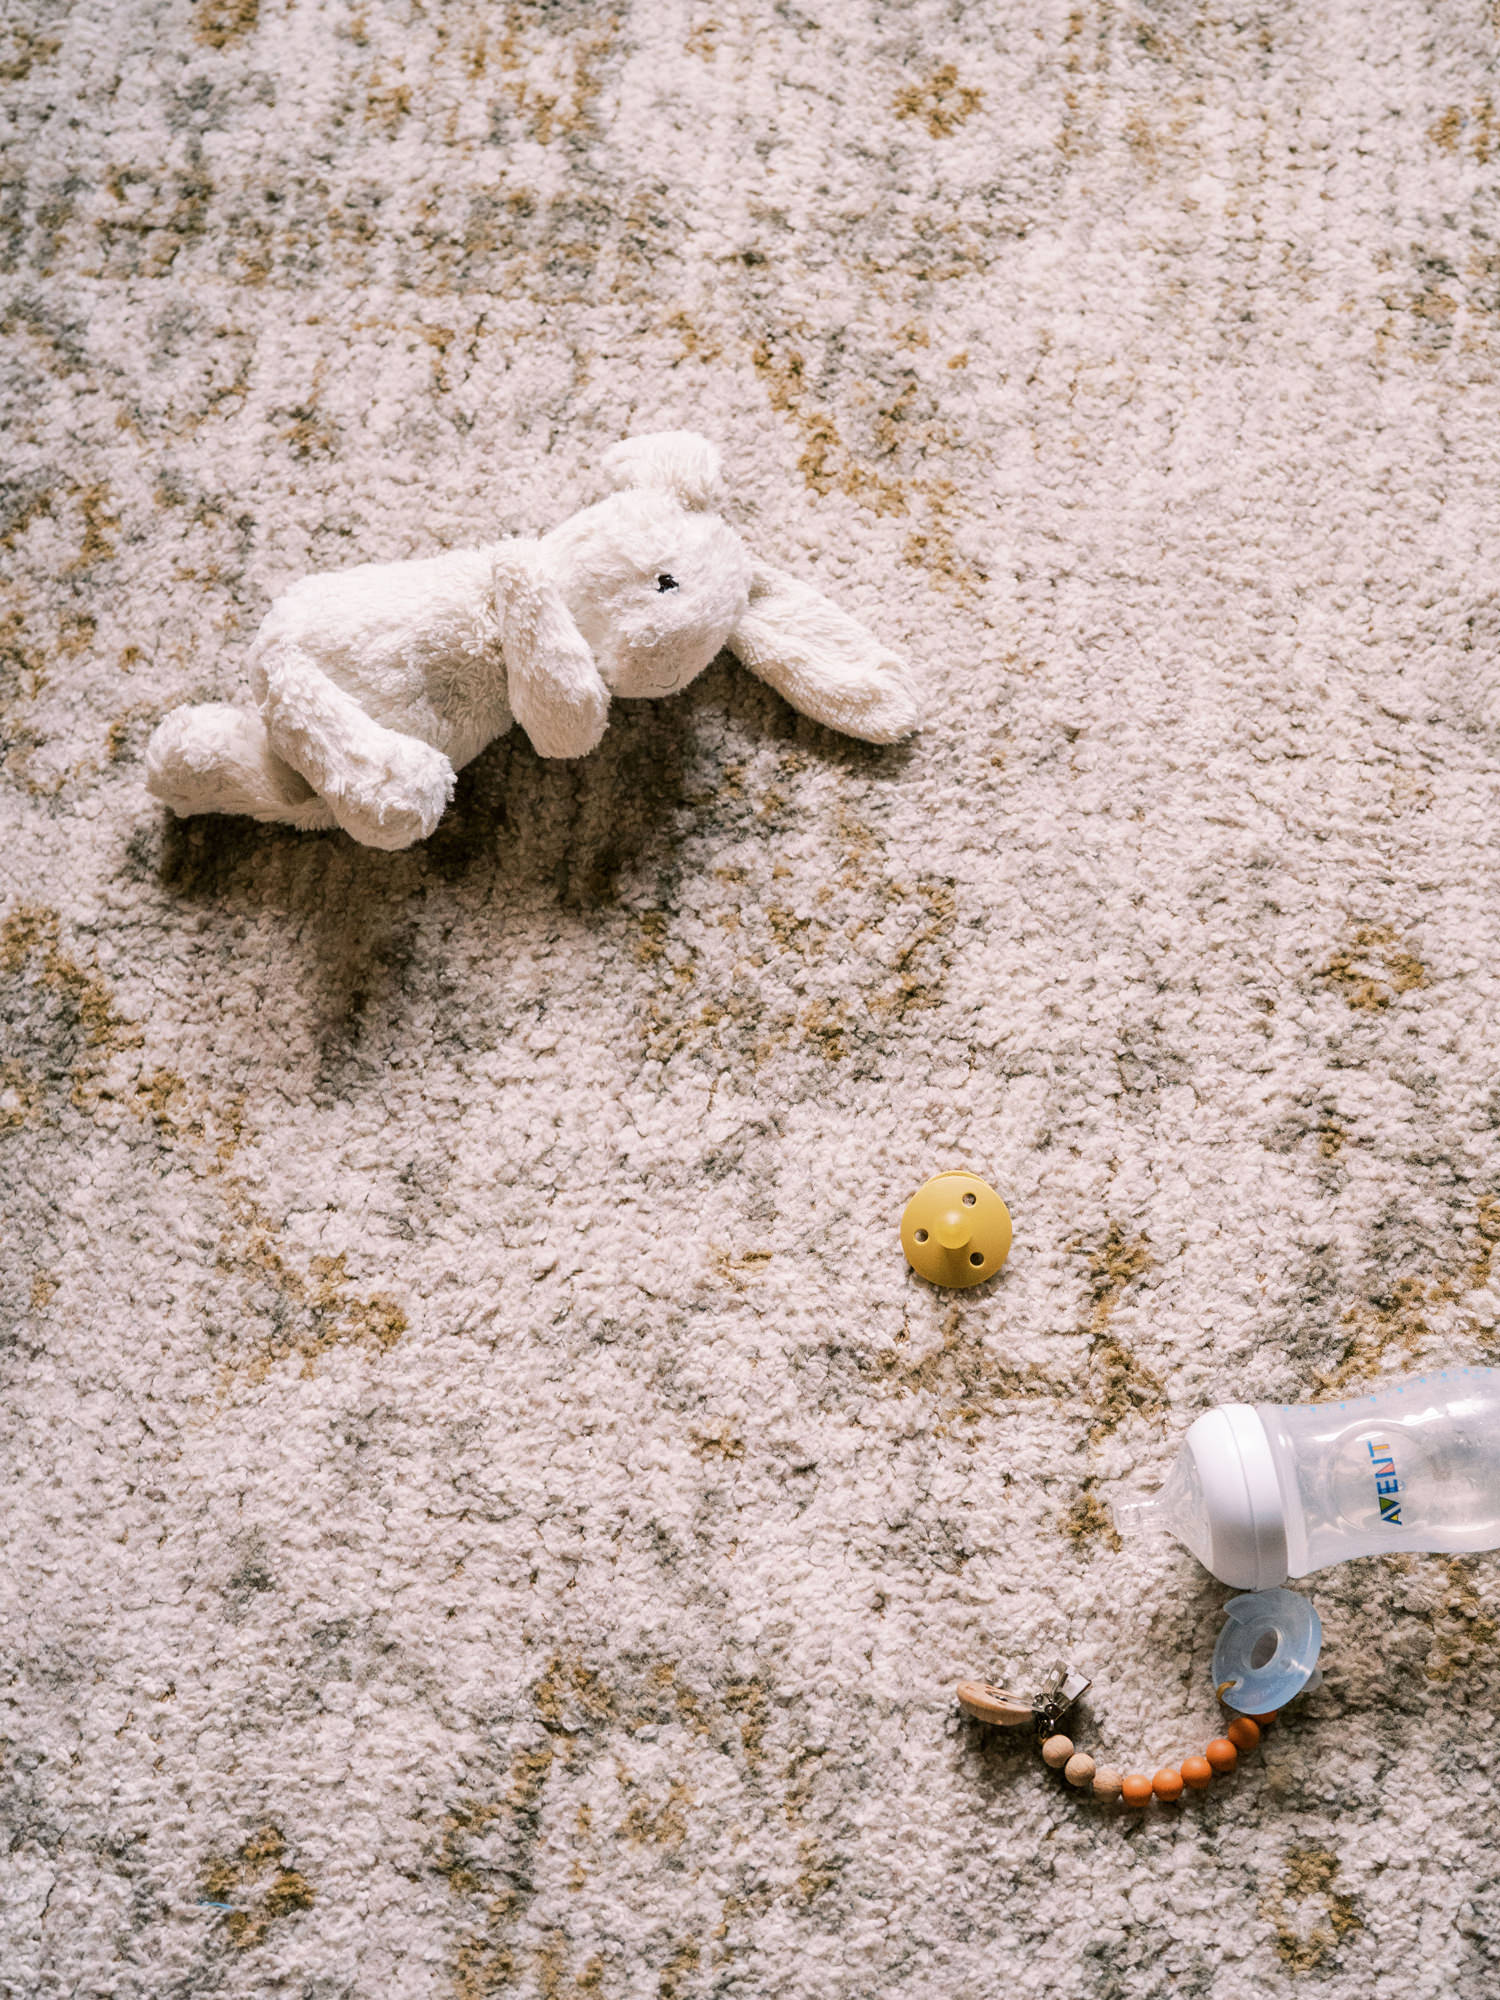 child's plush white rabbit toy lying on a tan Persian rug with a bottle and pacifier tossed nearby